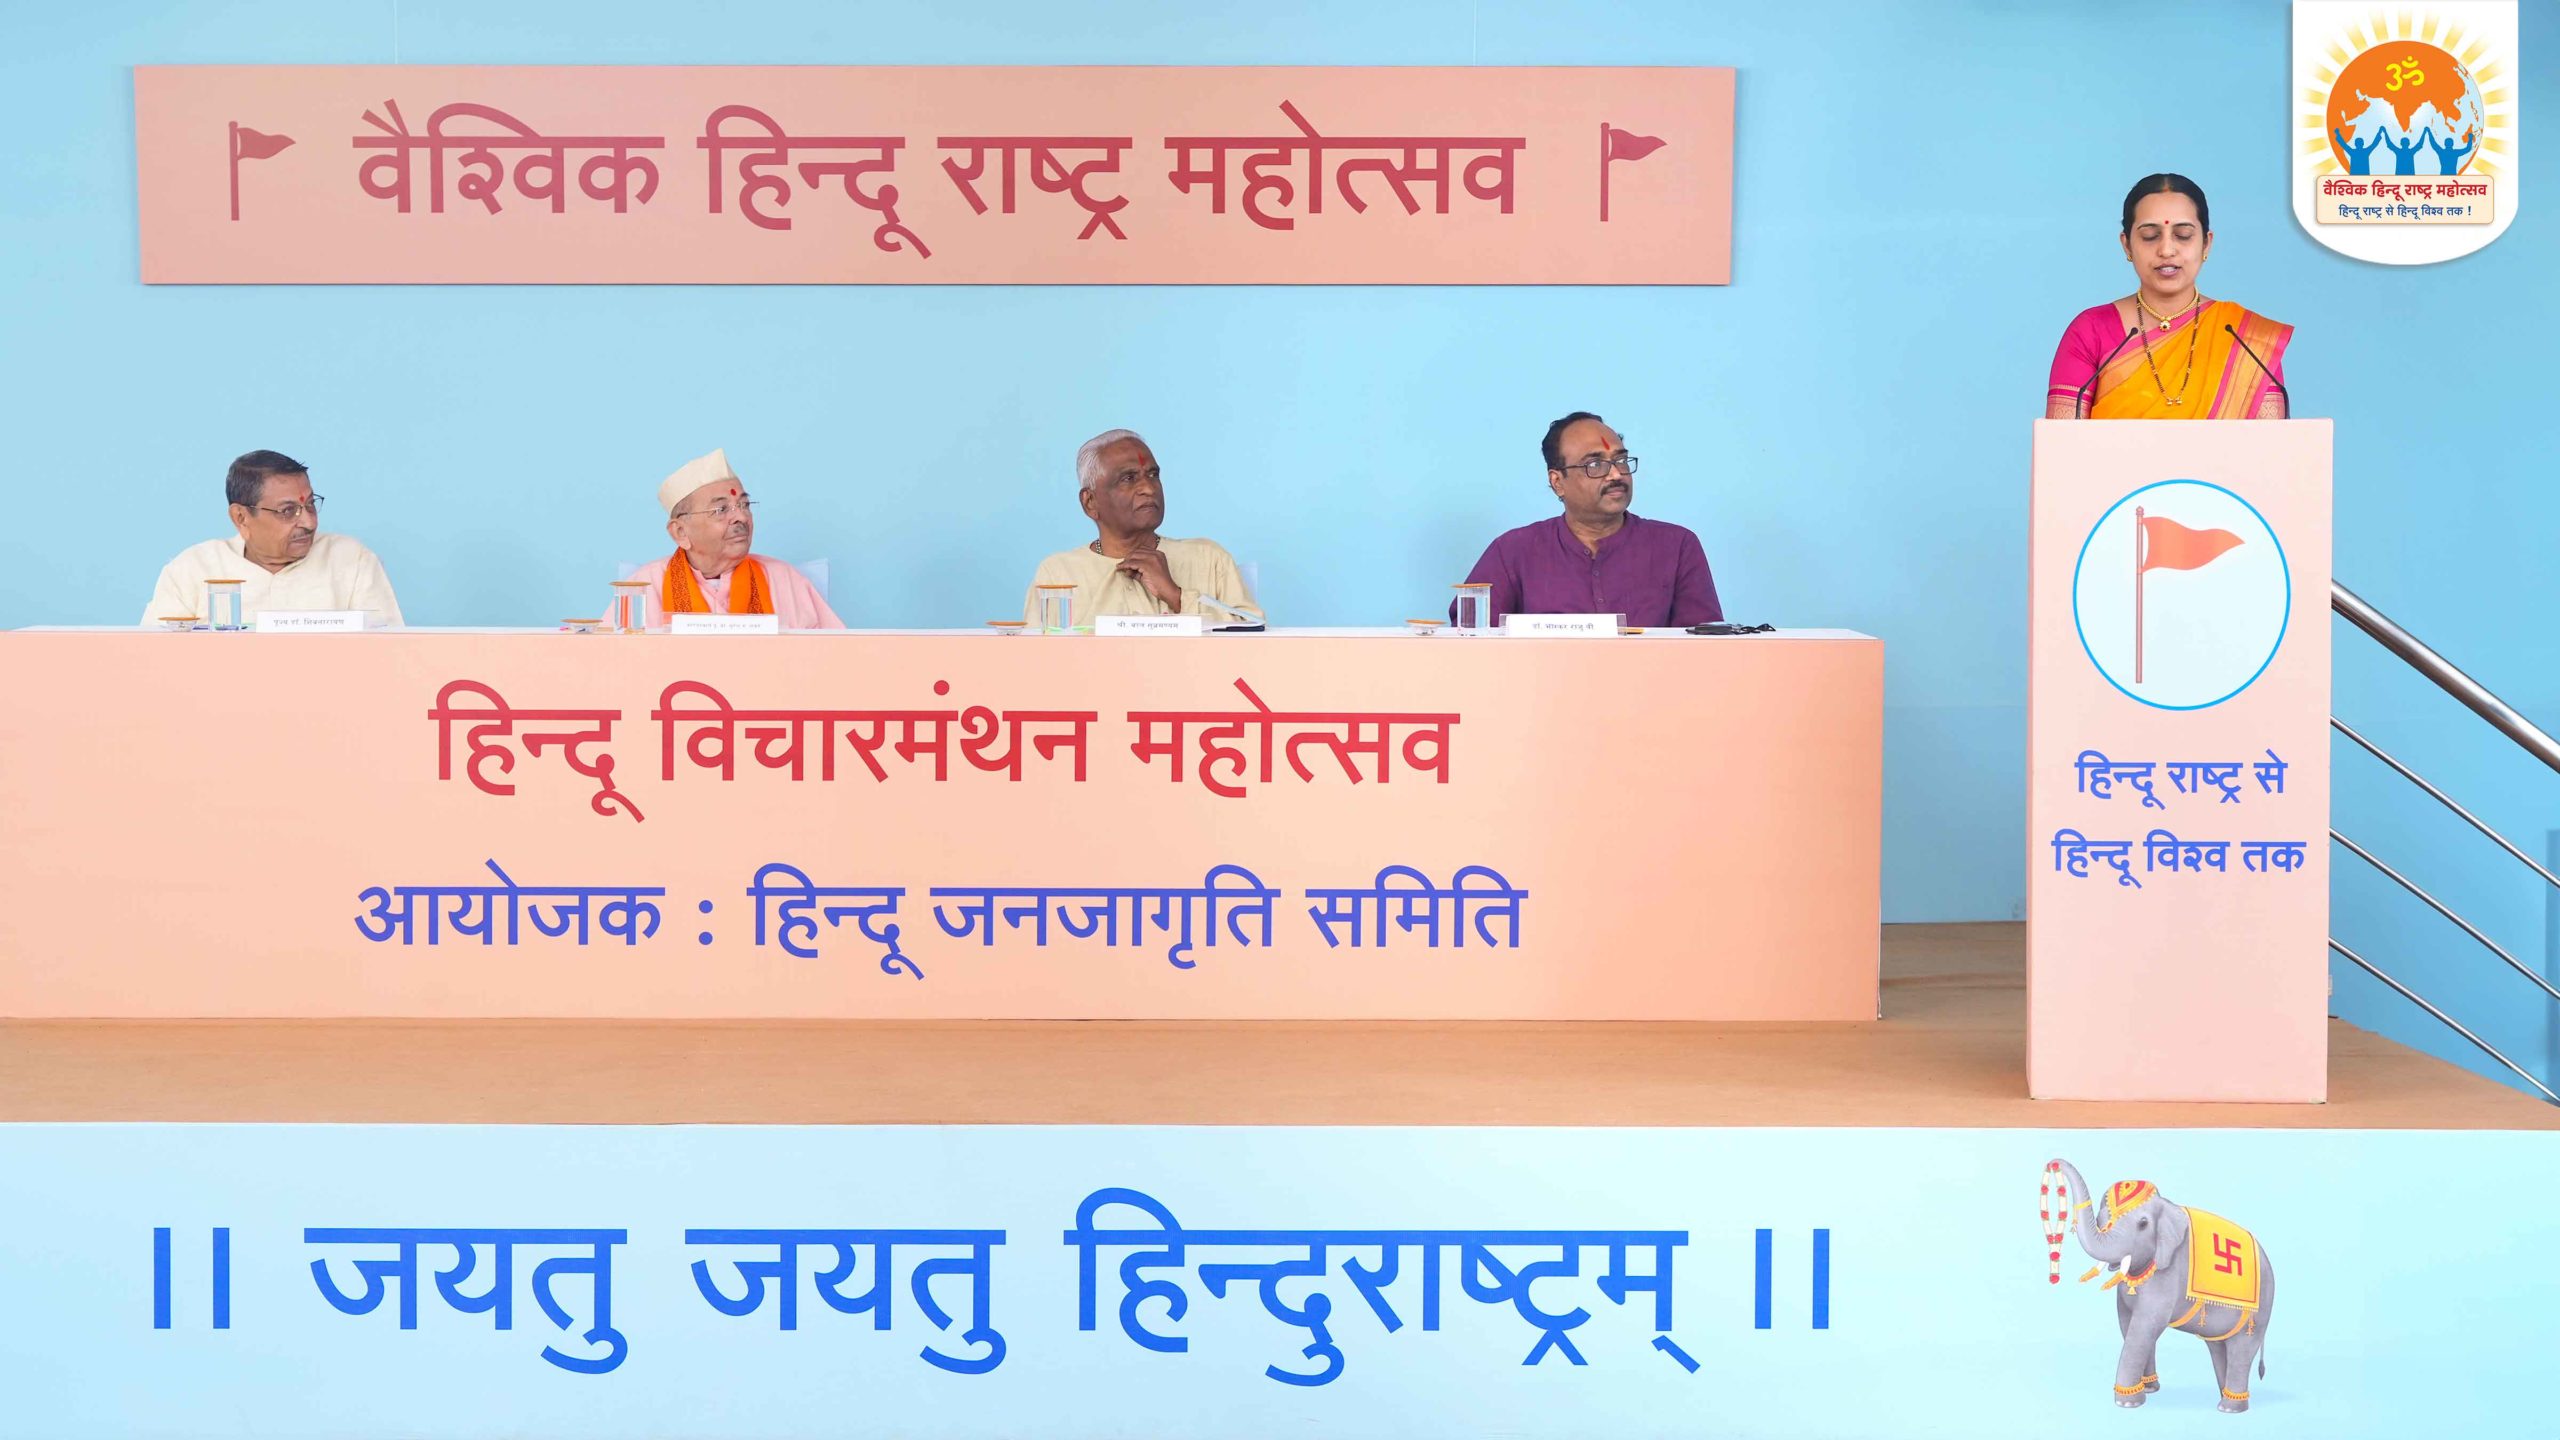 Devout Hindus participating in a discussion on the efforts required to safeguard the Nation, Dharma and Hindu way of life